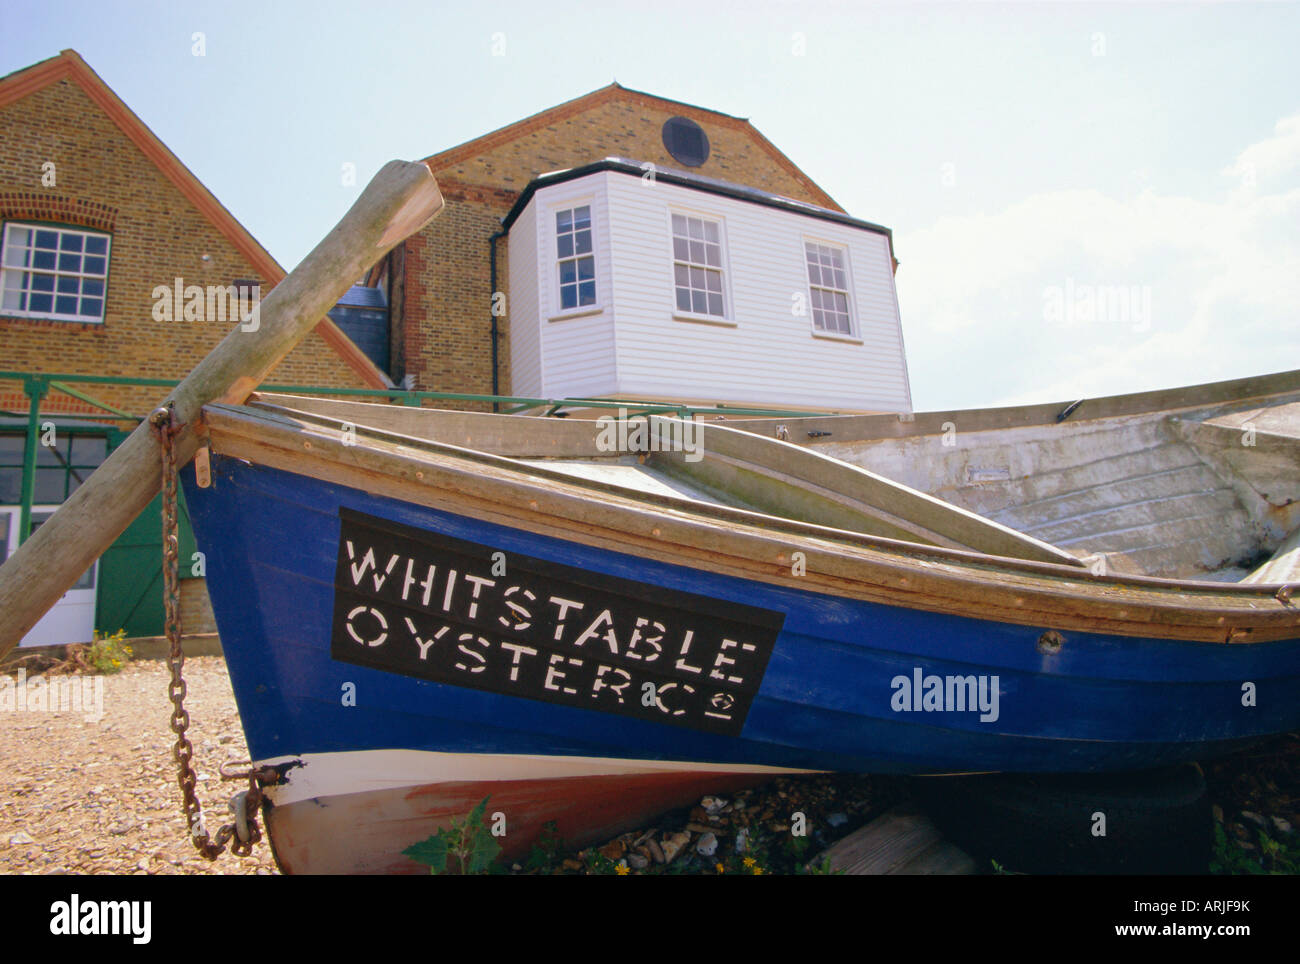 Fishing boat on the beach, Whitstable, Kent, England, UK. Whitstable is popular for it's oyster and fish restaurants. Stock Photo